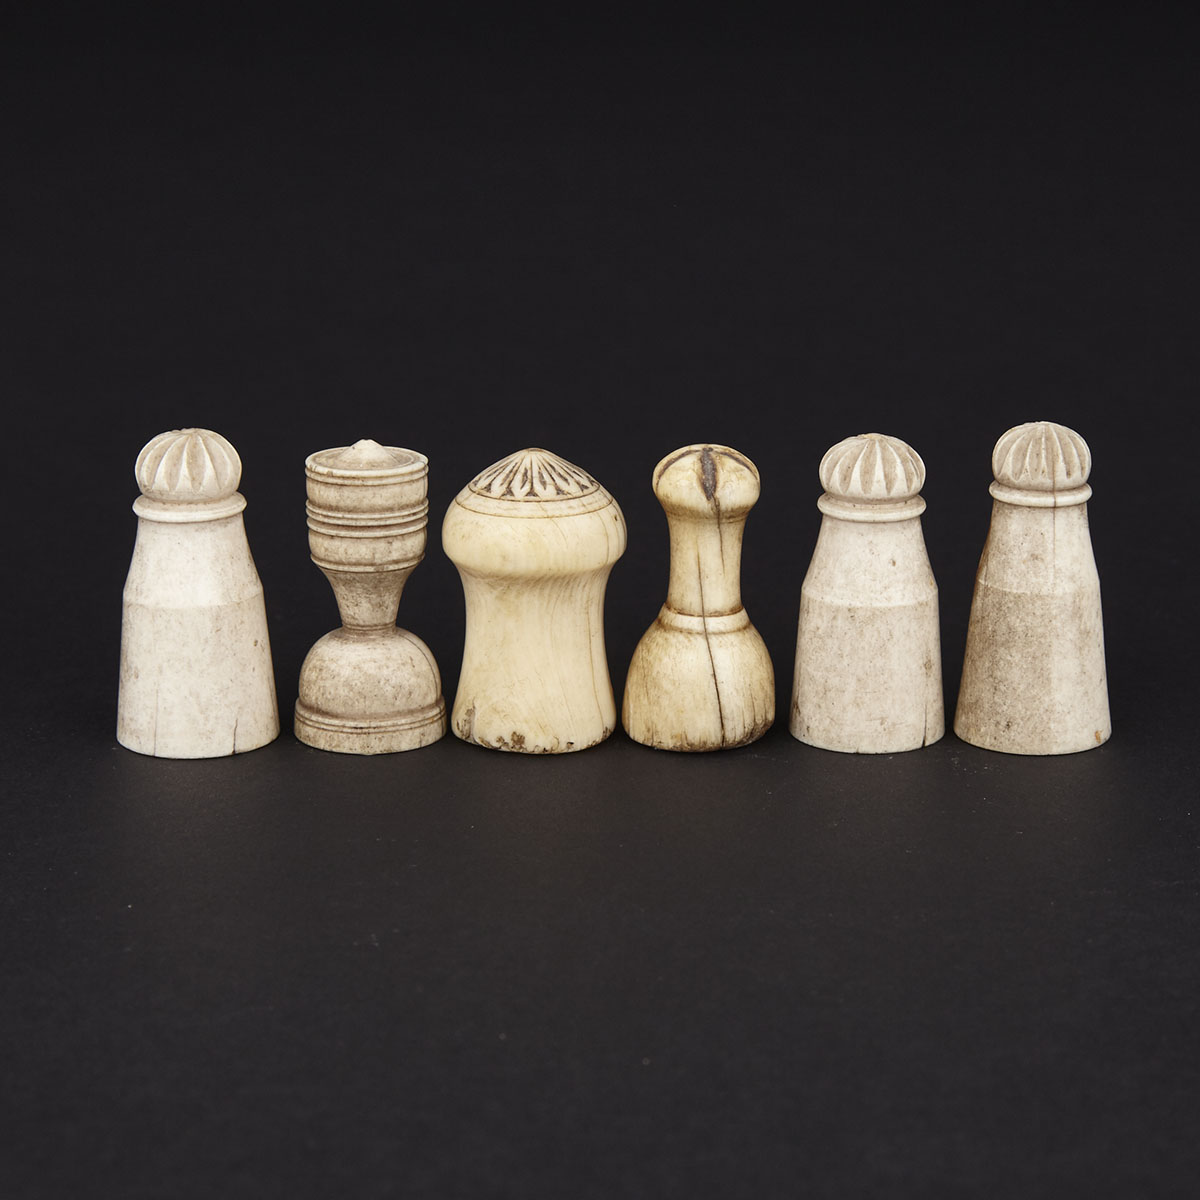 Group of Six Arab Islamic Ivory and Bone Chess Pieces, 18th century and earlier